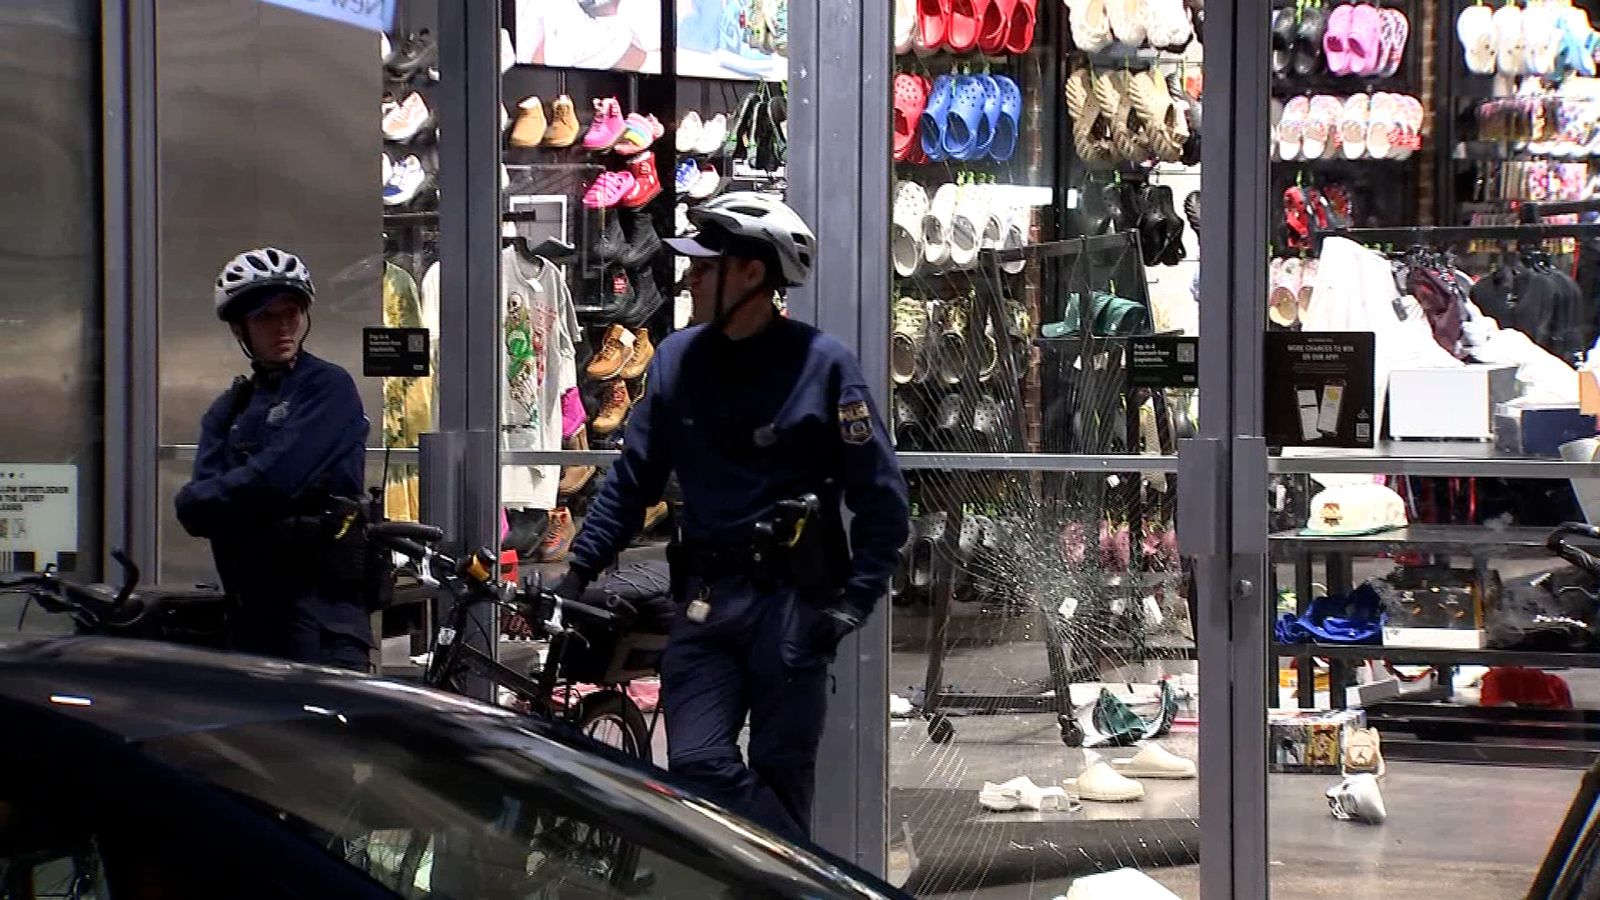 The Philadelphia Police Commissioner takes action of the looting incidents in Philadelphia. (Photo: CNN)